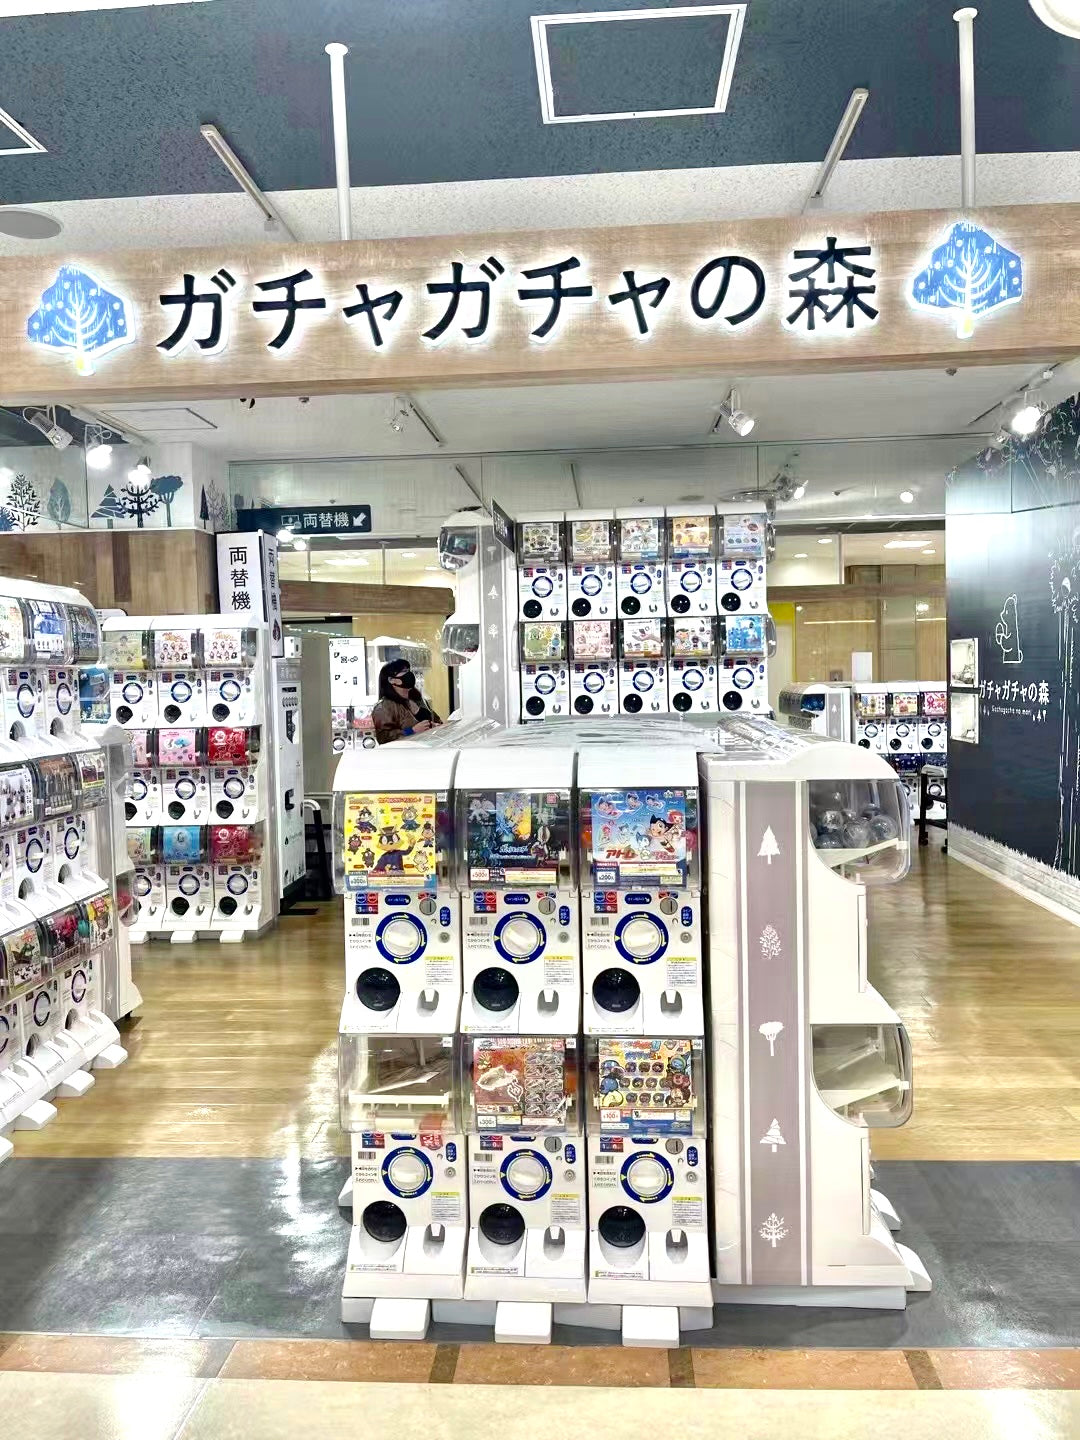 99911 CAPSULE GASHAPON VENDING MACHINE-1 - SOLD OUT 3/22/24 - CONTACT BC@BCMINI.COM TO PRE-ORDER